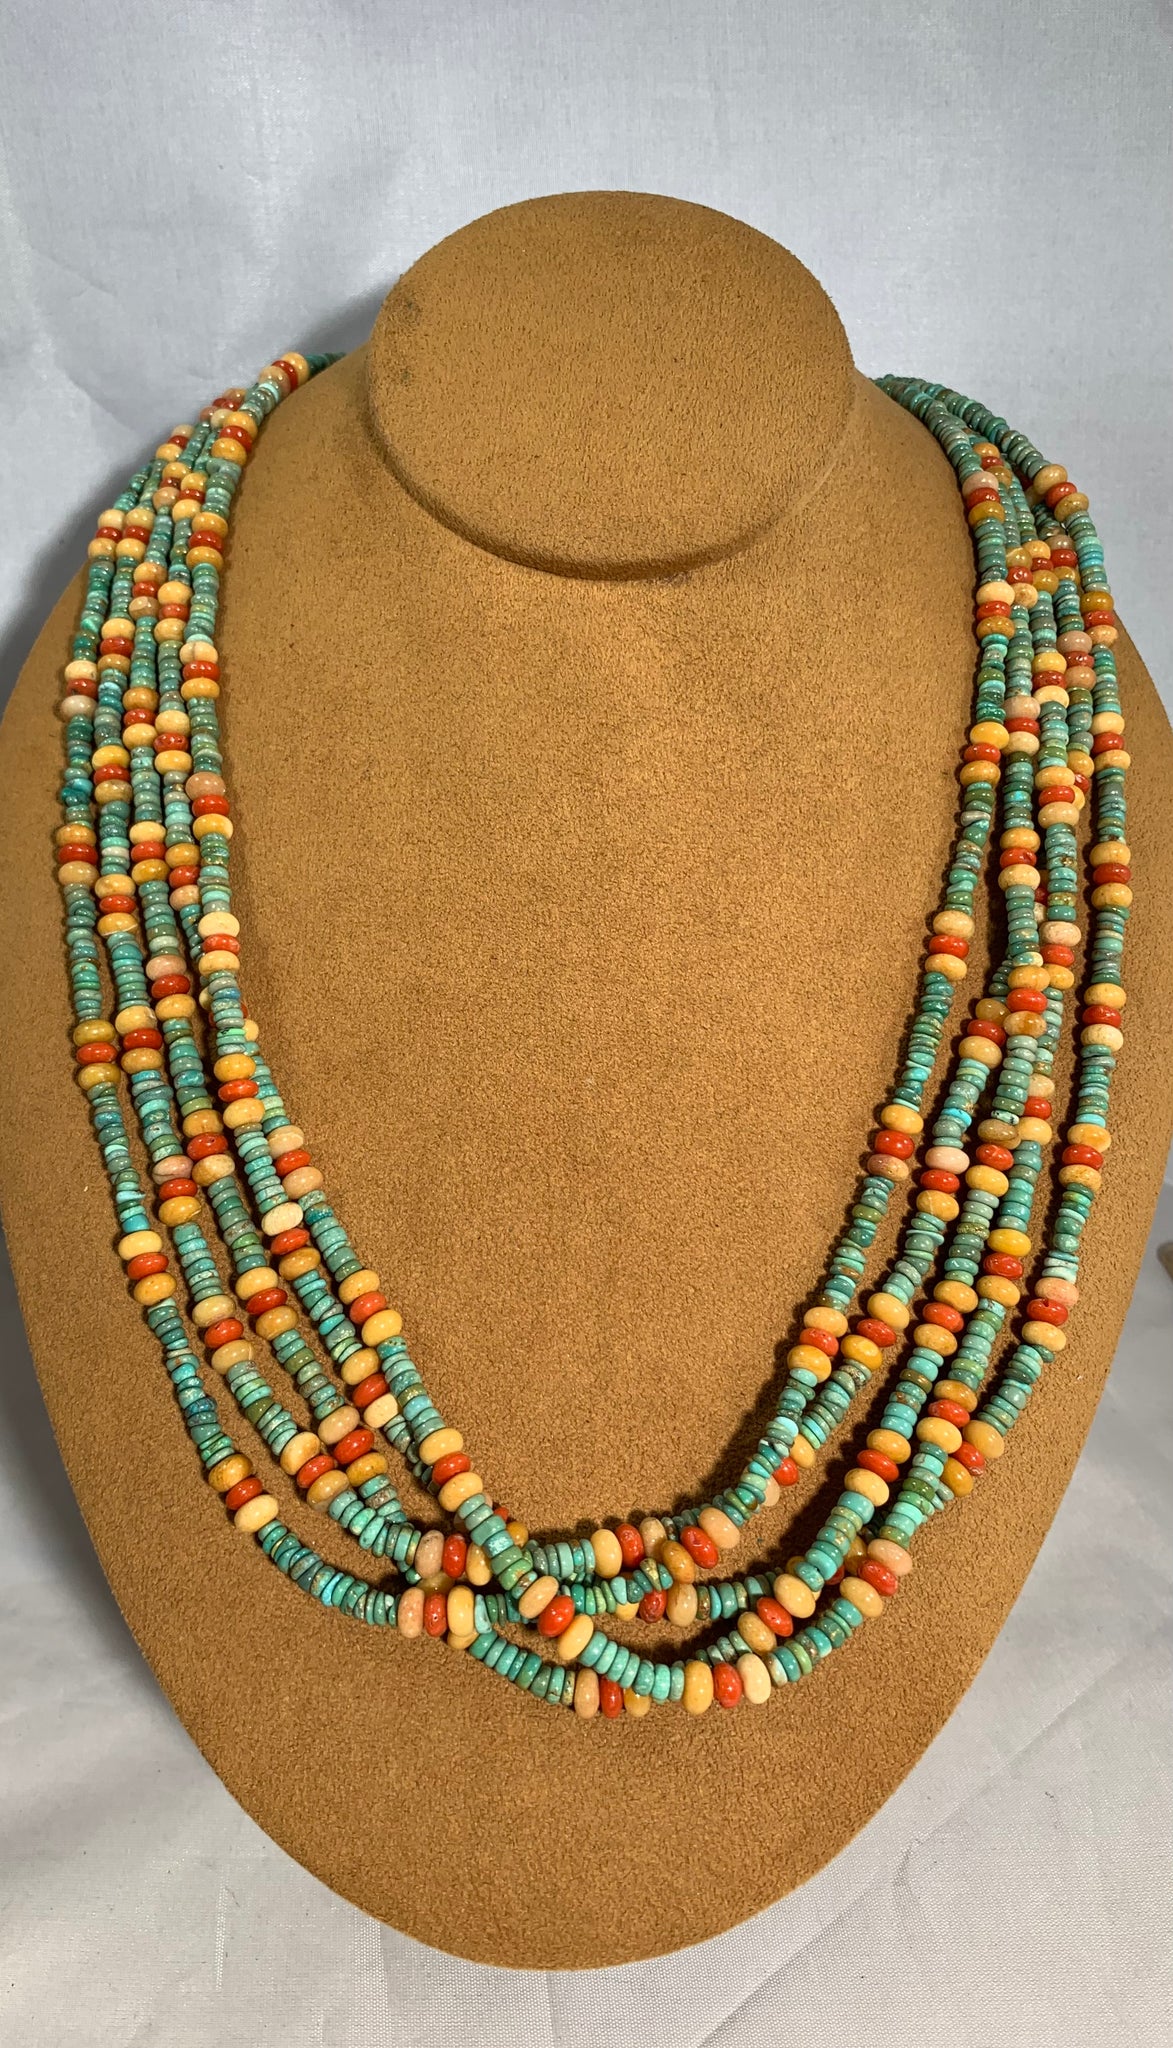 Green Turquoise Five Strand Necklace by Don Lucas